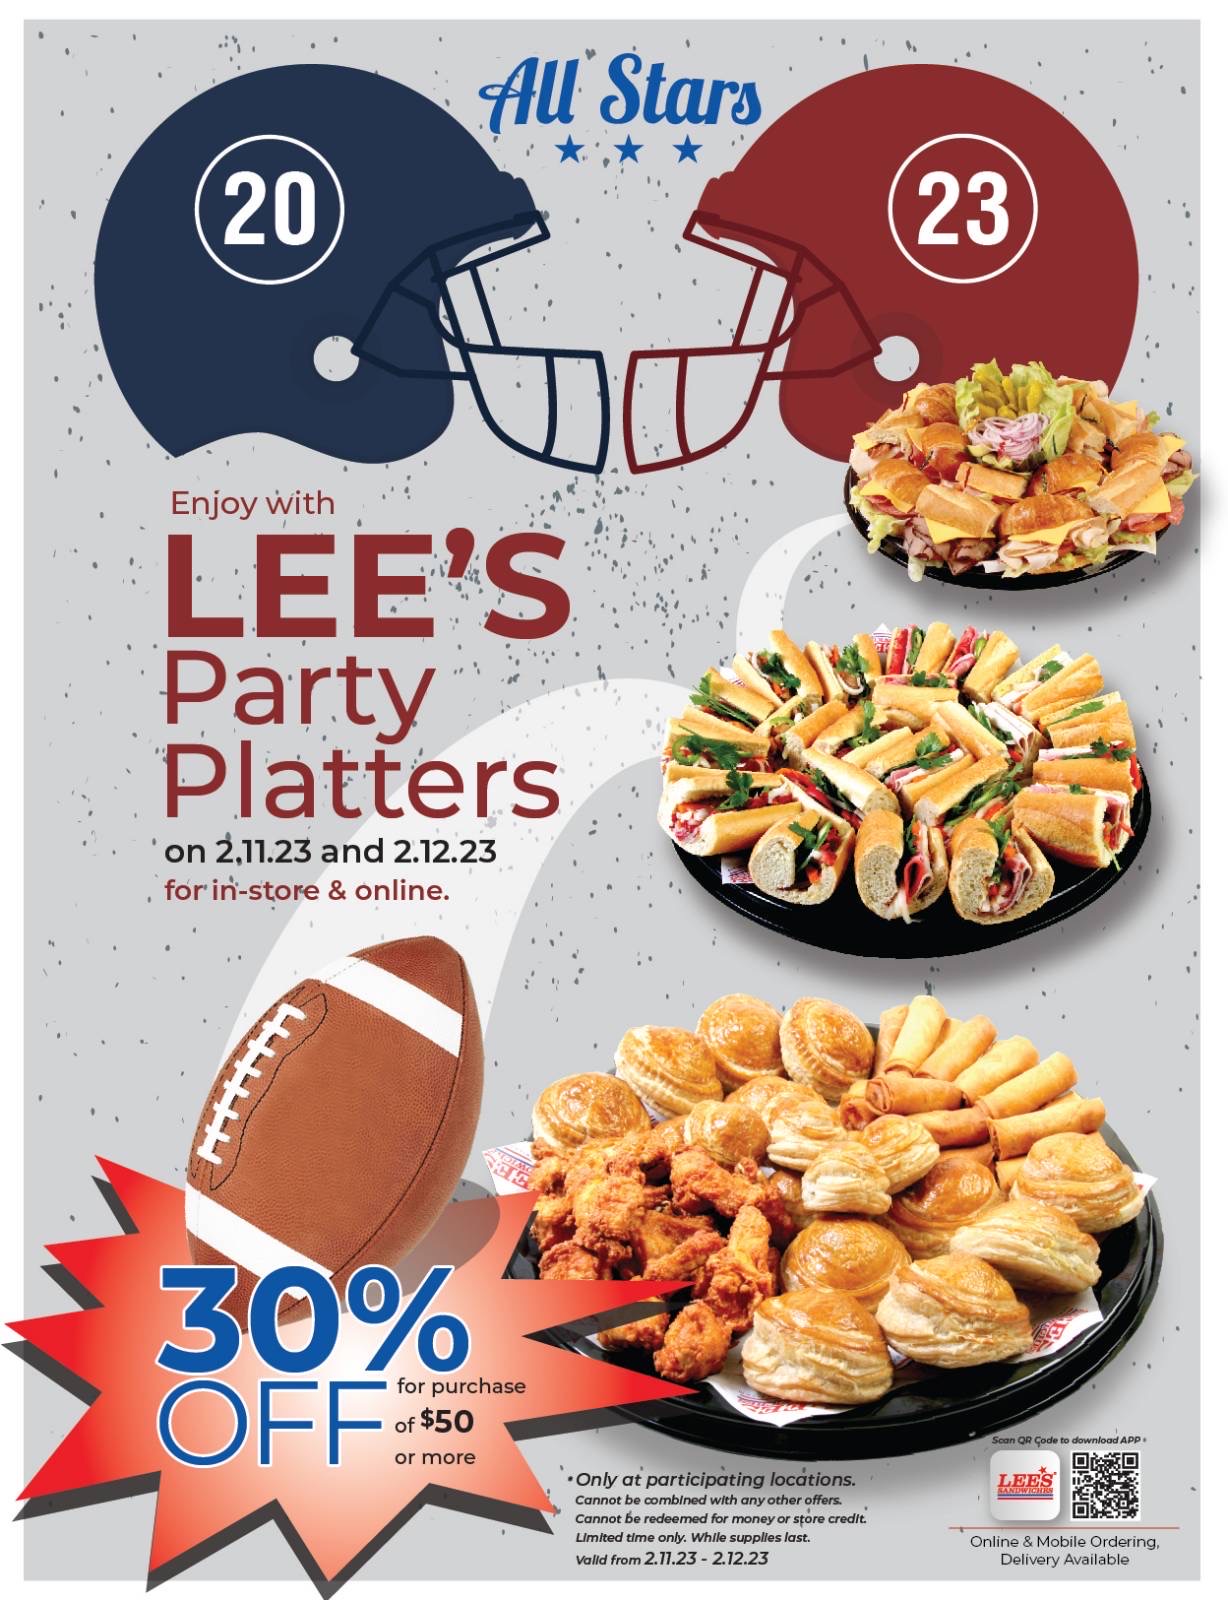 Enjoy SuperBowl with our 30% OFF Party Platters from 2/11-2/12/2023